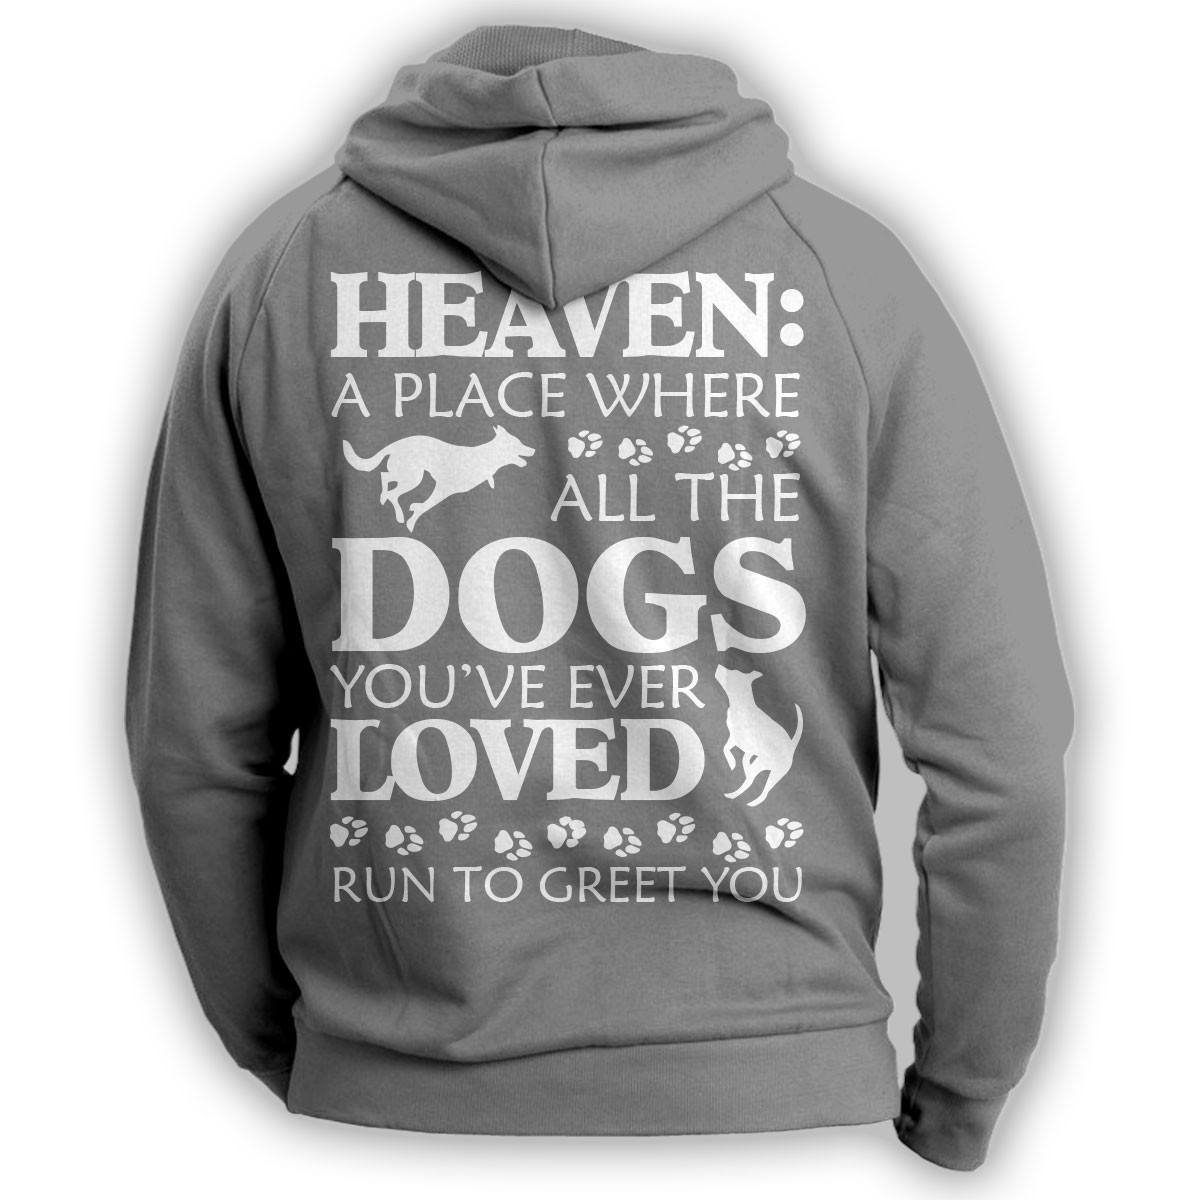 "Heaven: A Place Where Dogs Run To Greet You" Hoodie